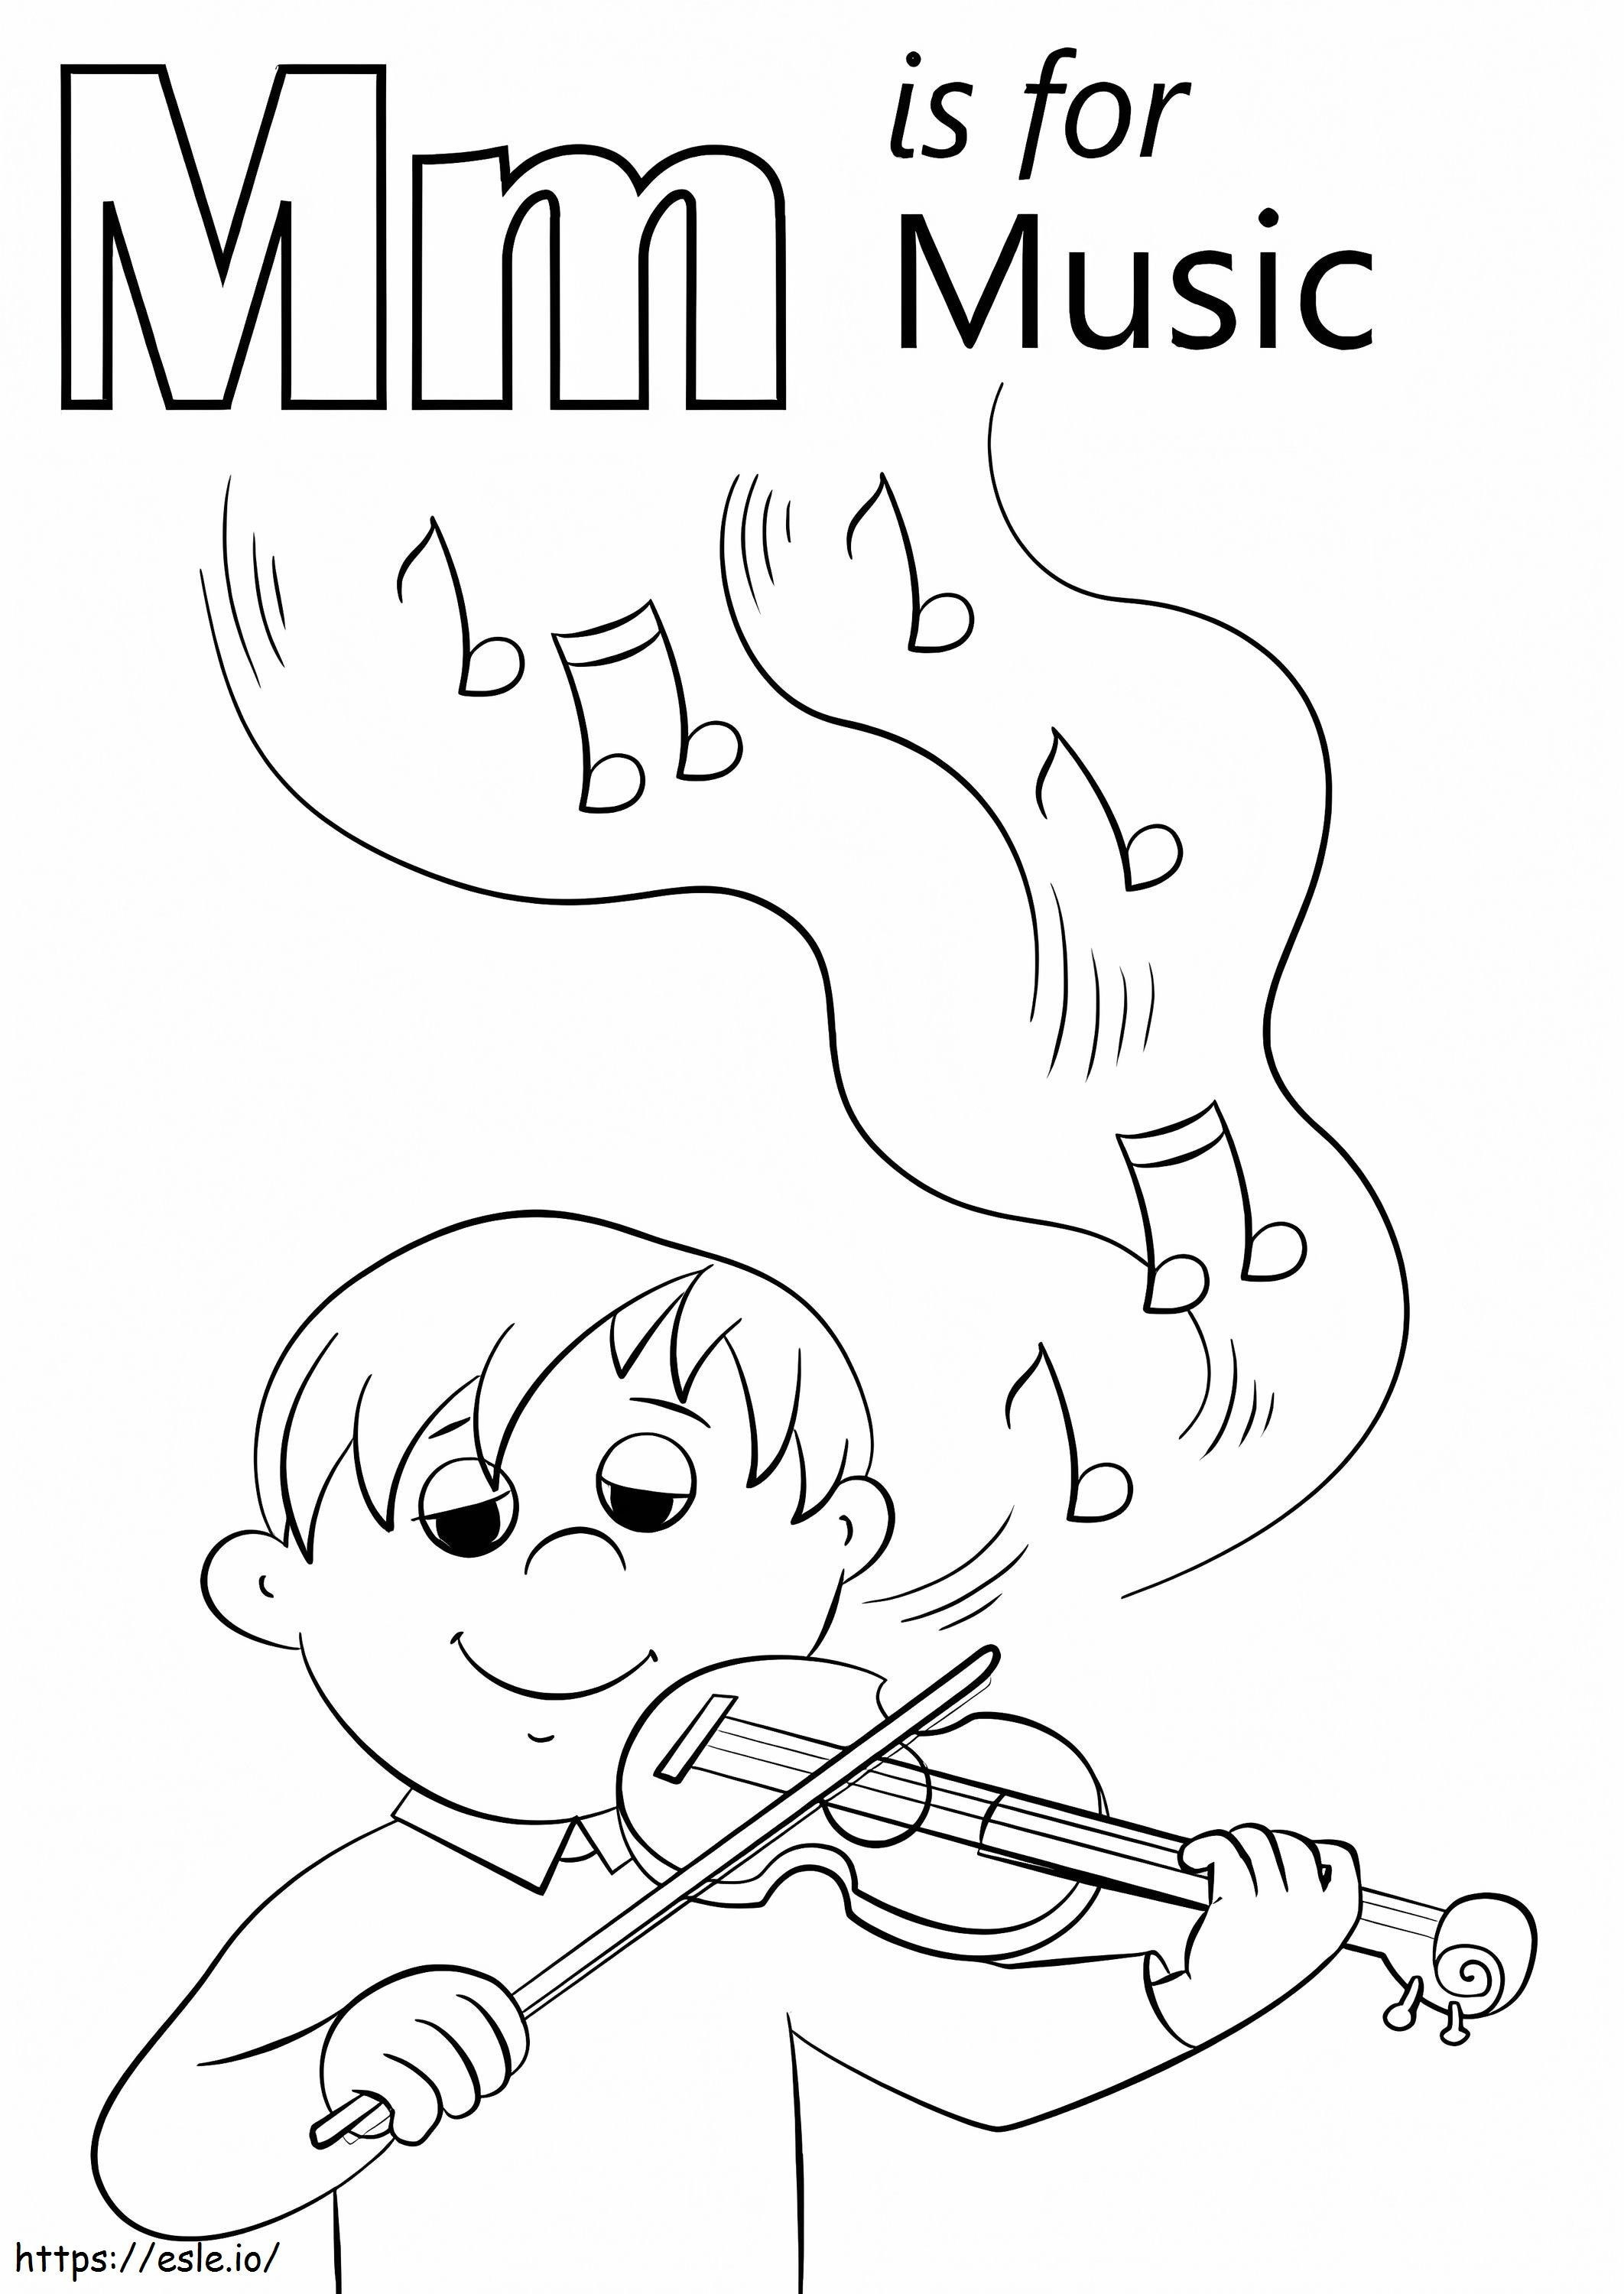 Music Letter M coloring page